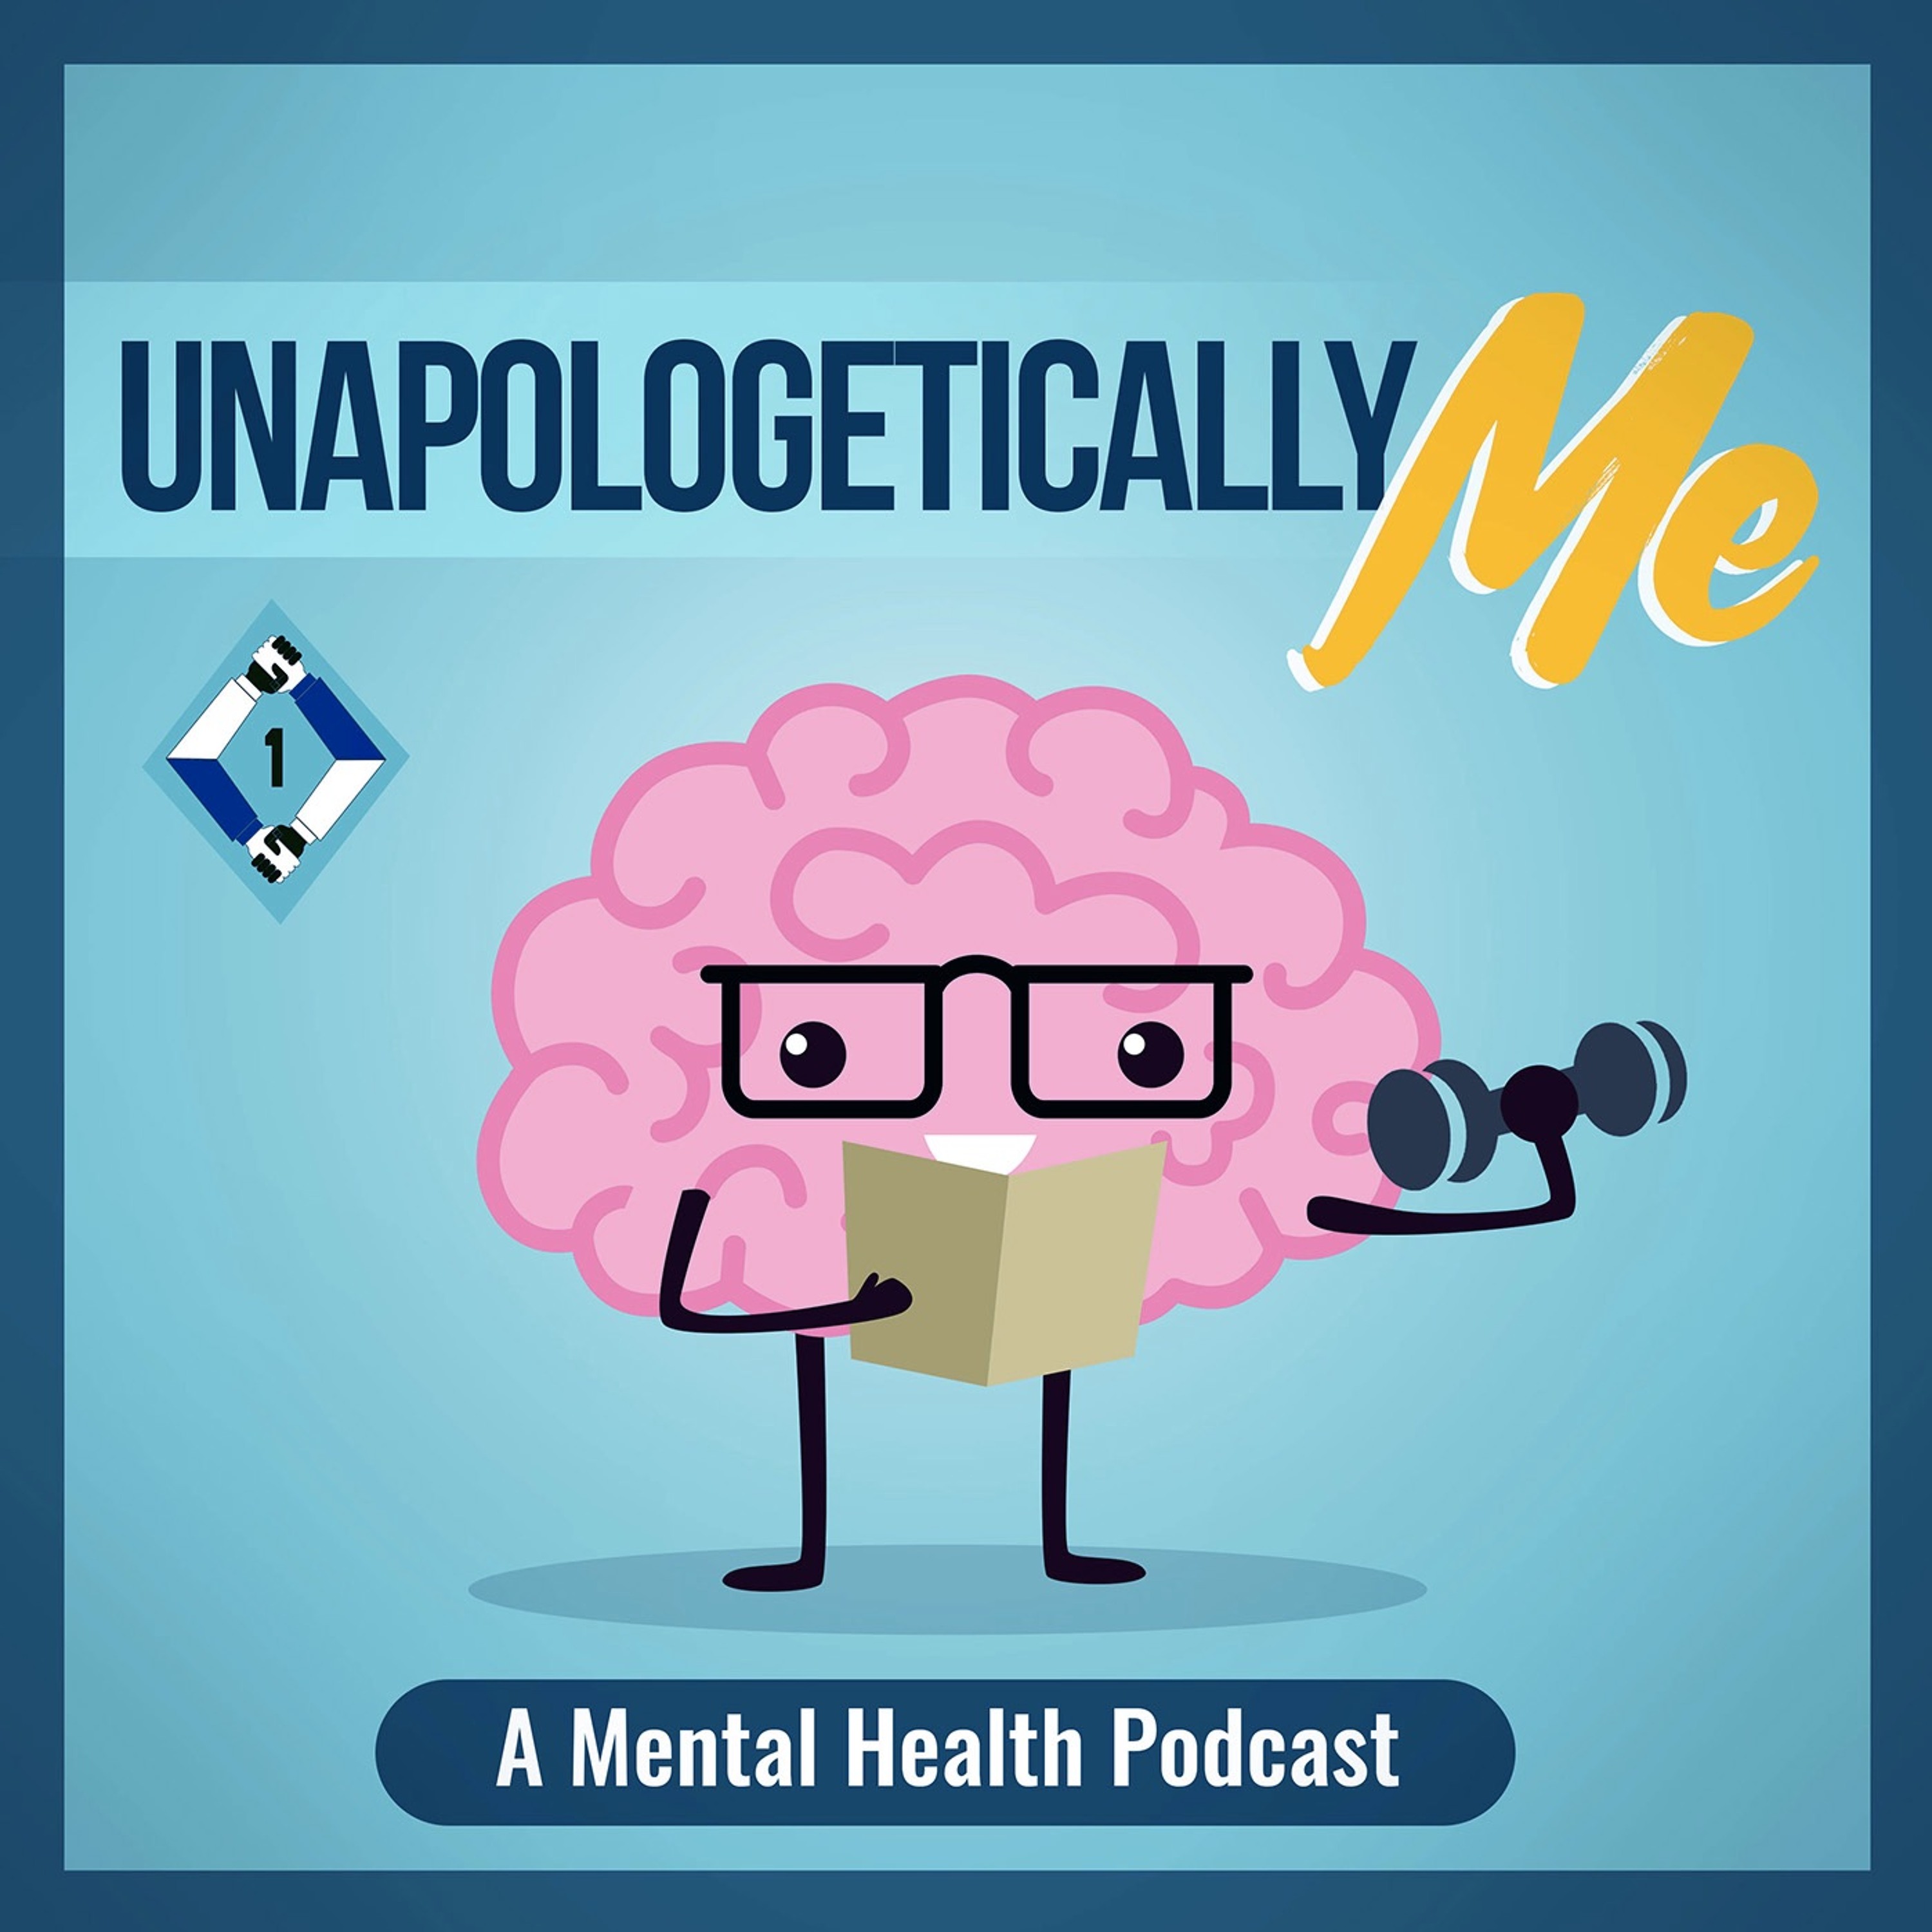 Unapologetically Me: A Mental Health Podcast - Core Confidence With Dennis Sumlin